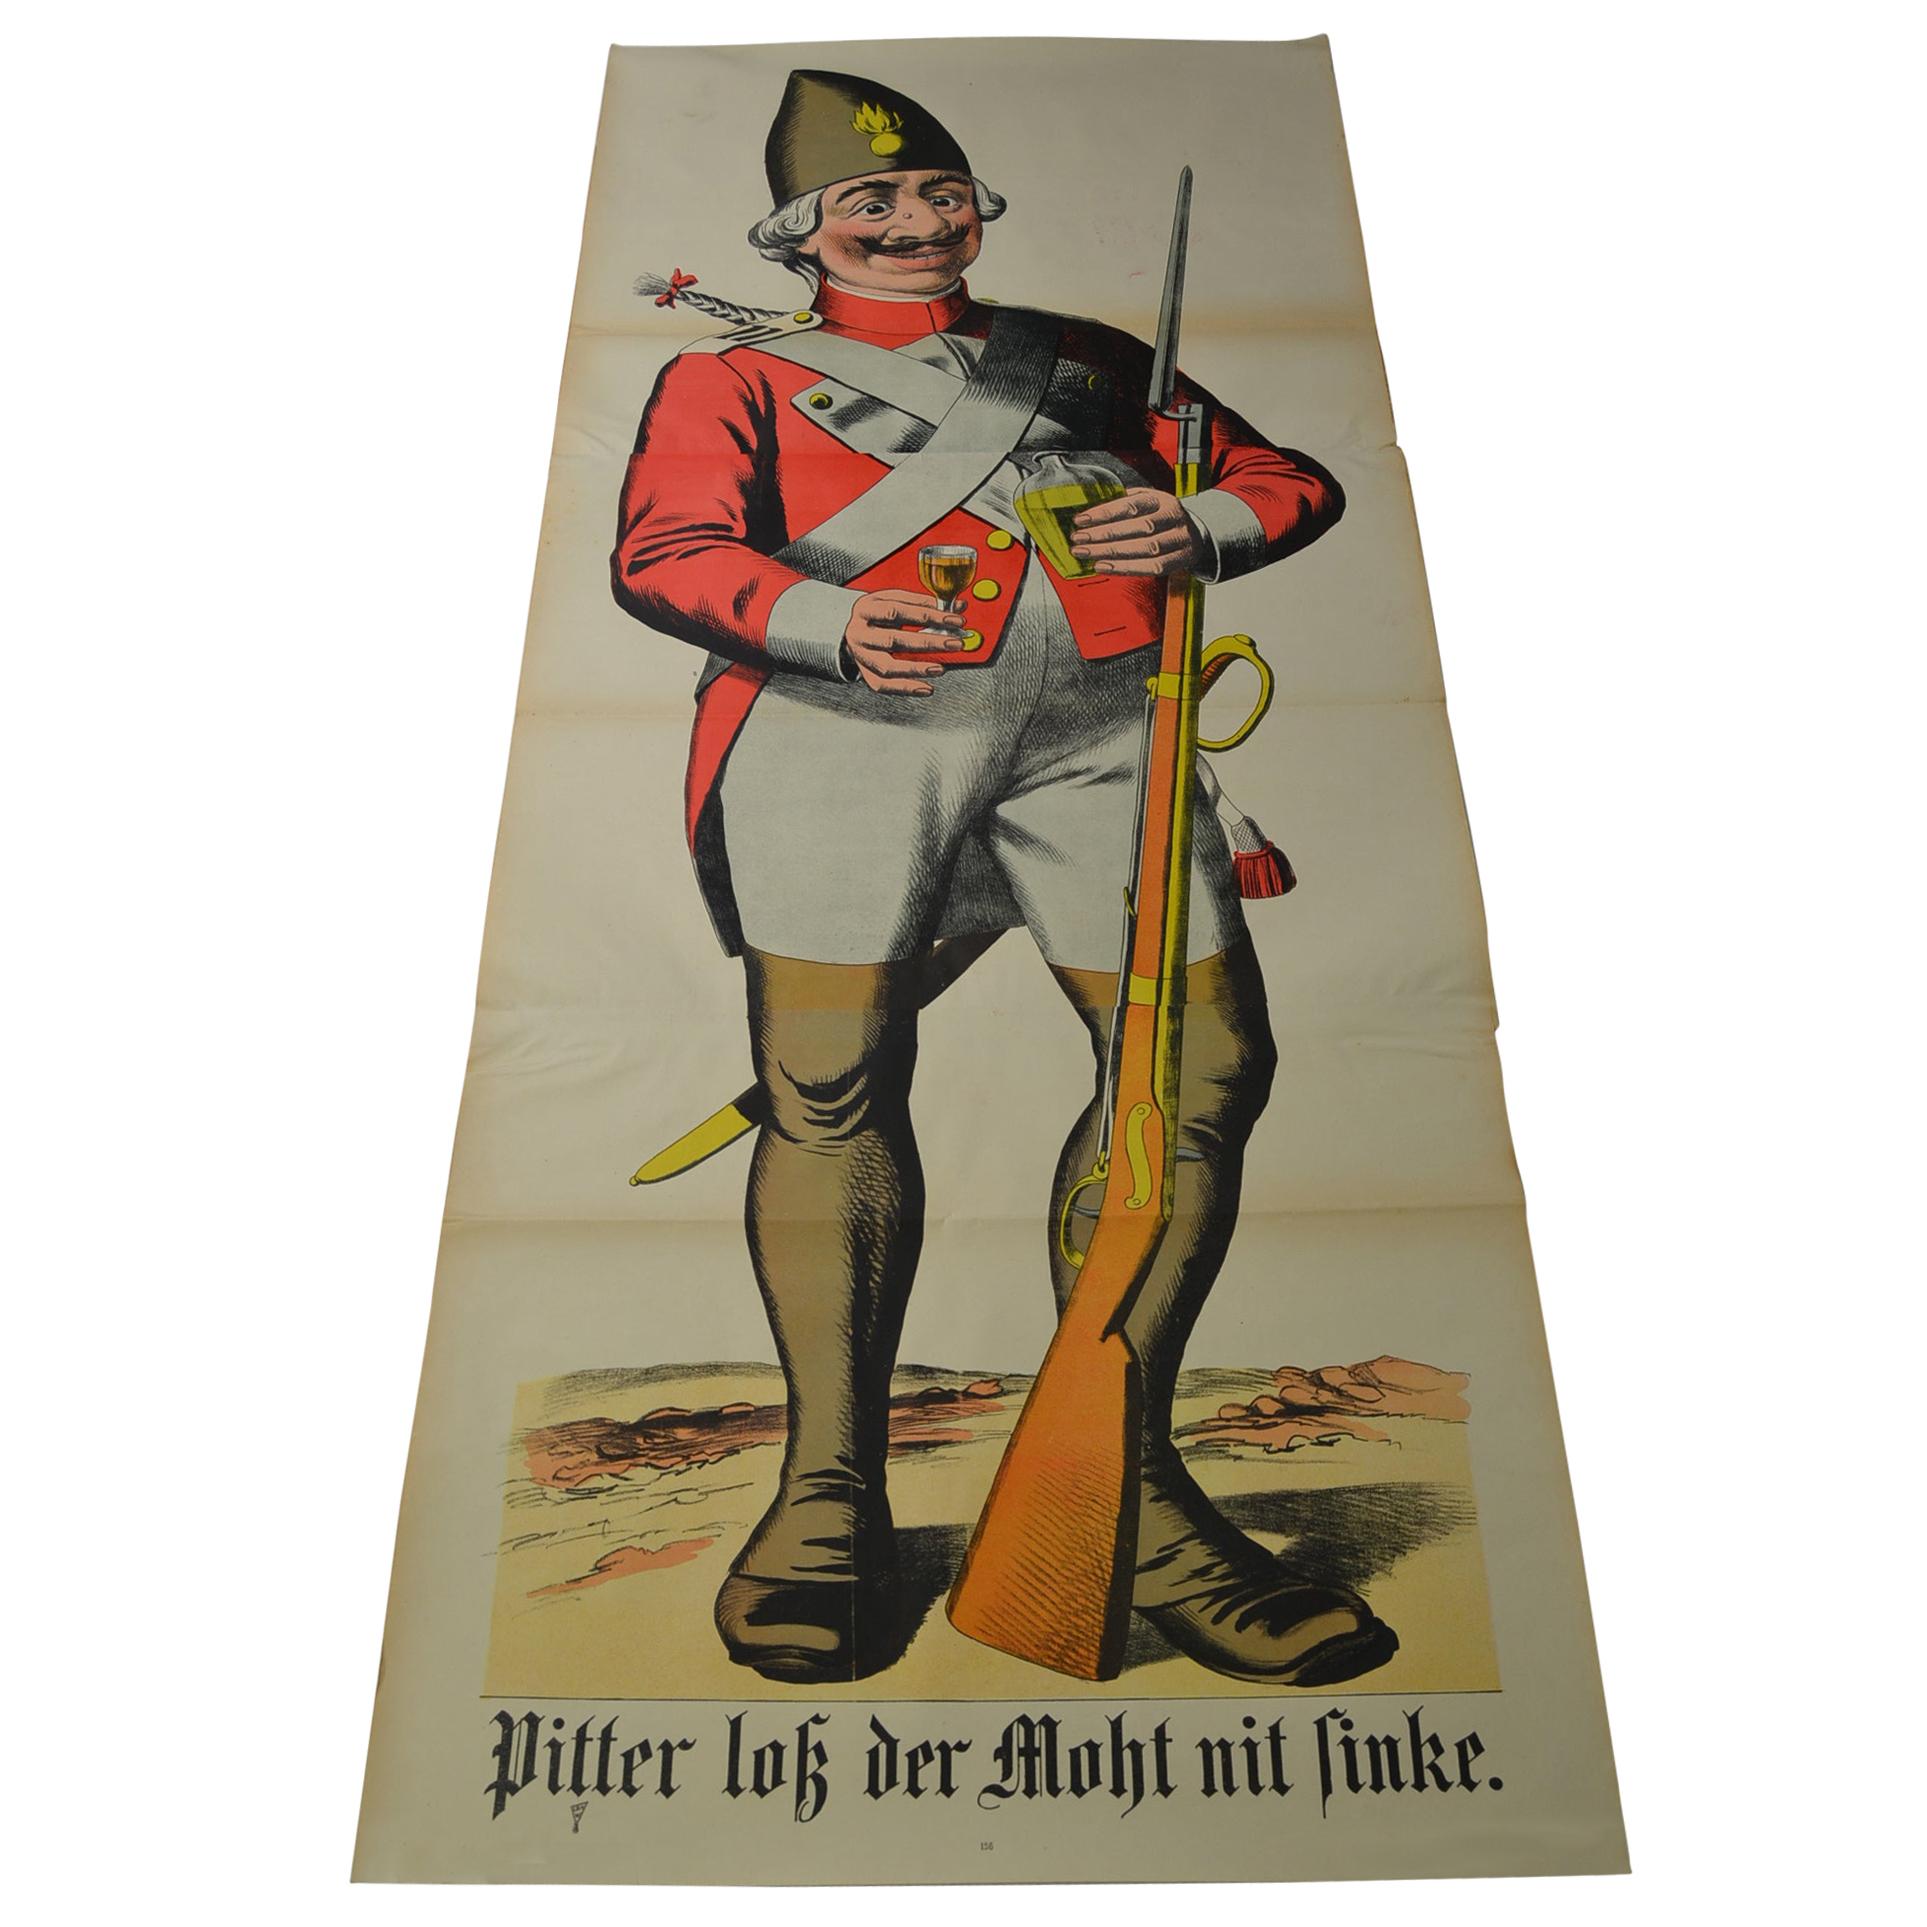 1880s European Lifesize Stone Lithography Poster with an Officer For Sale